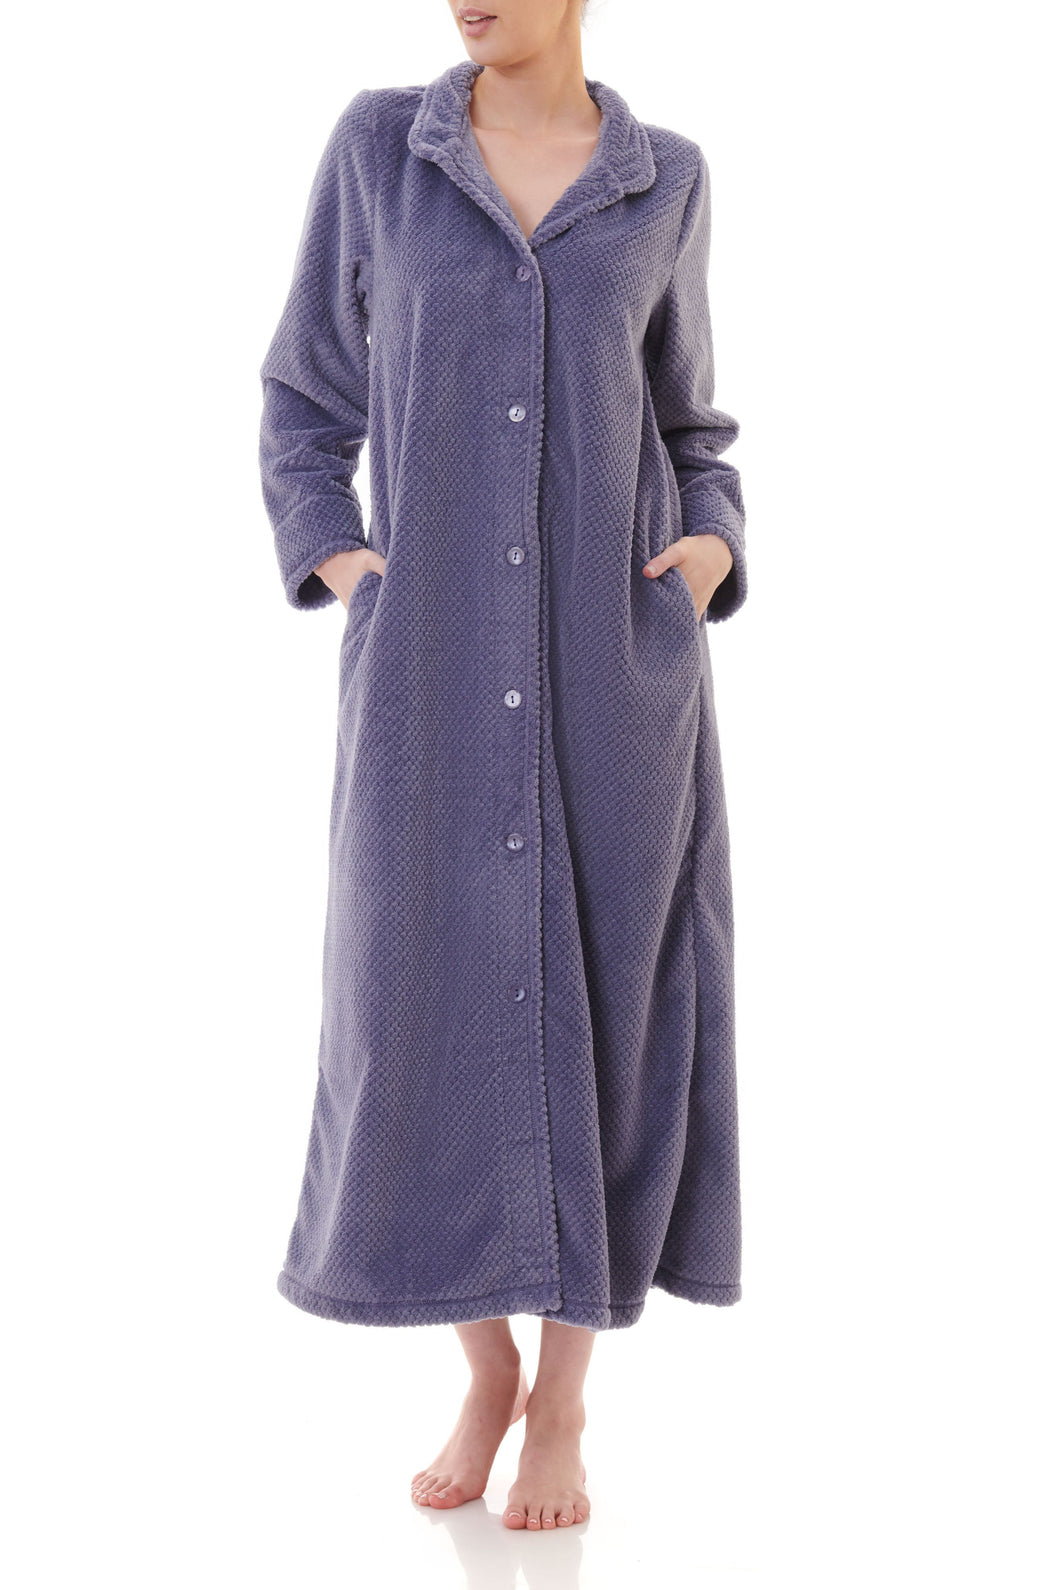 GIVONI - LONG BUTTON UP GOWN